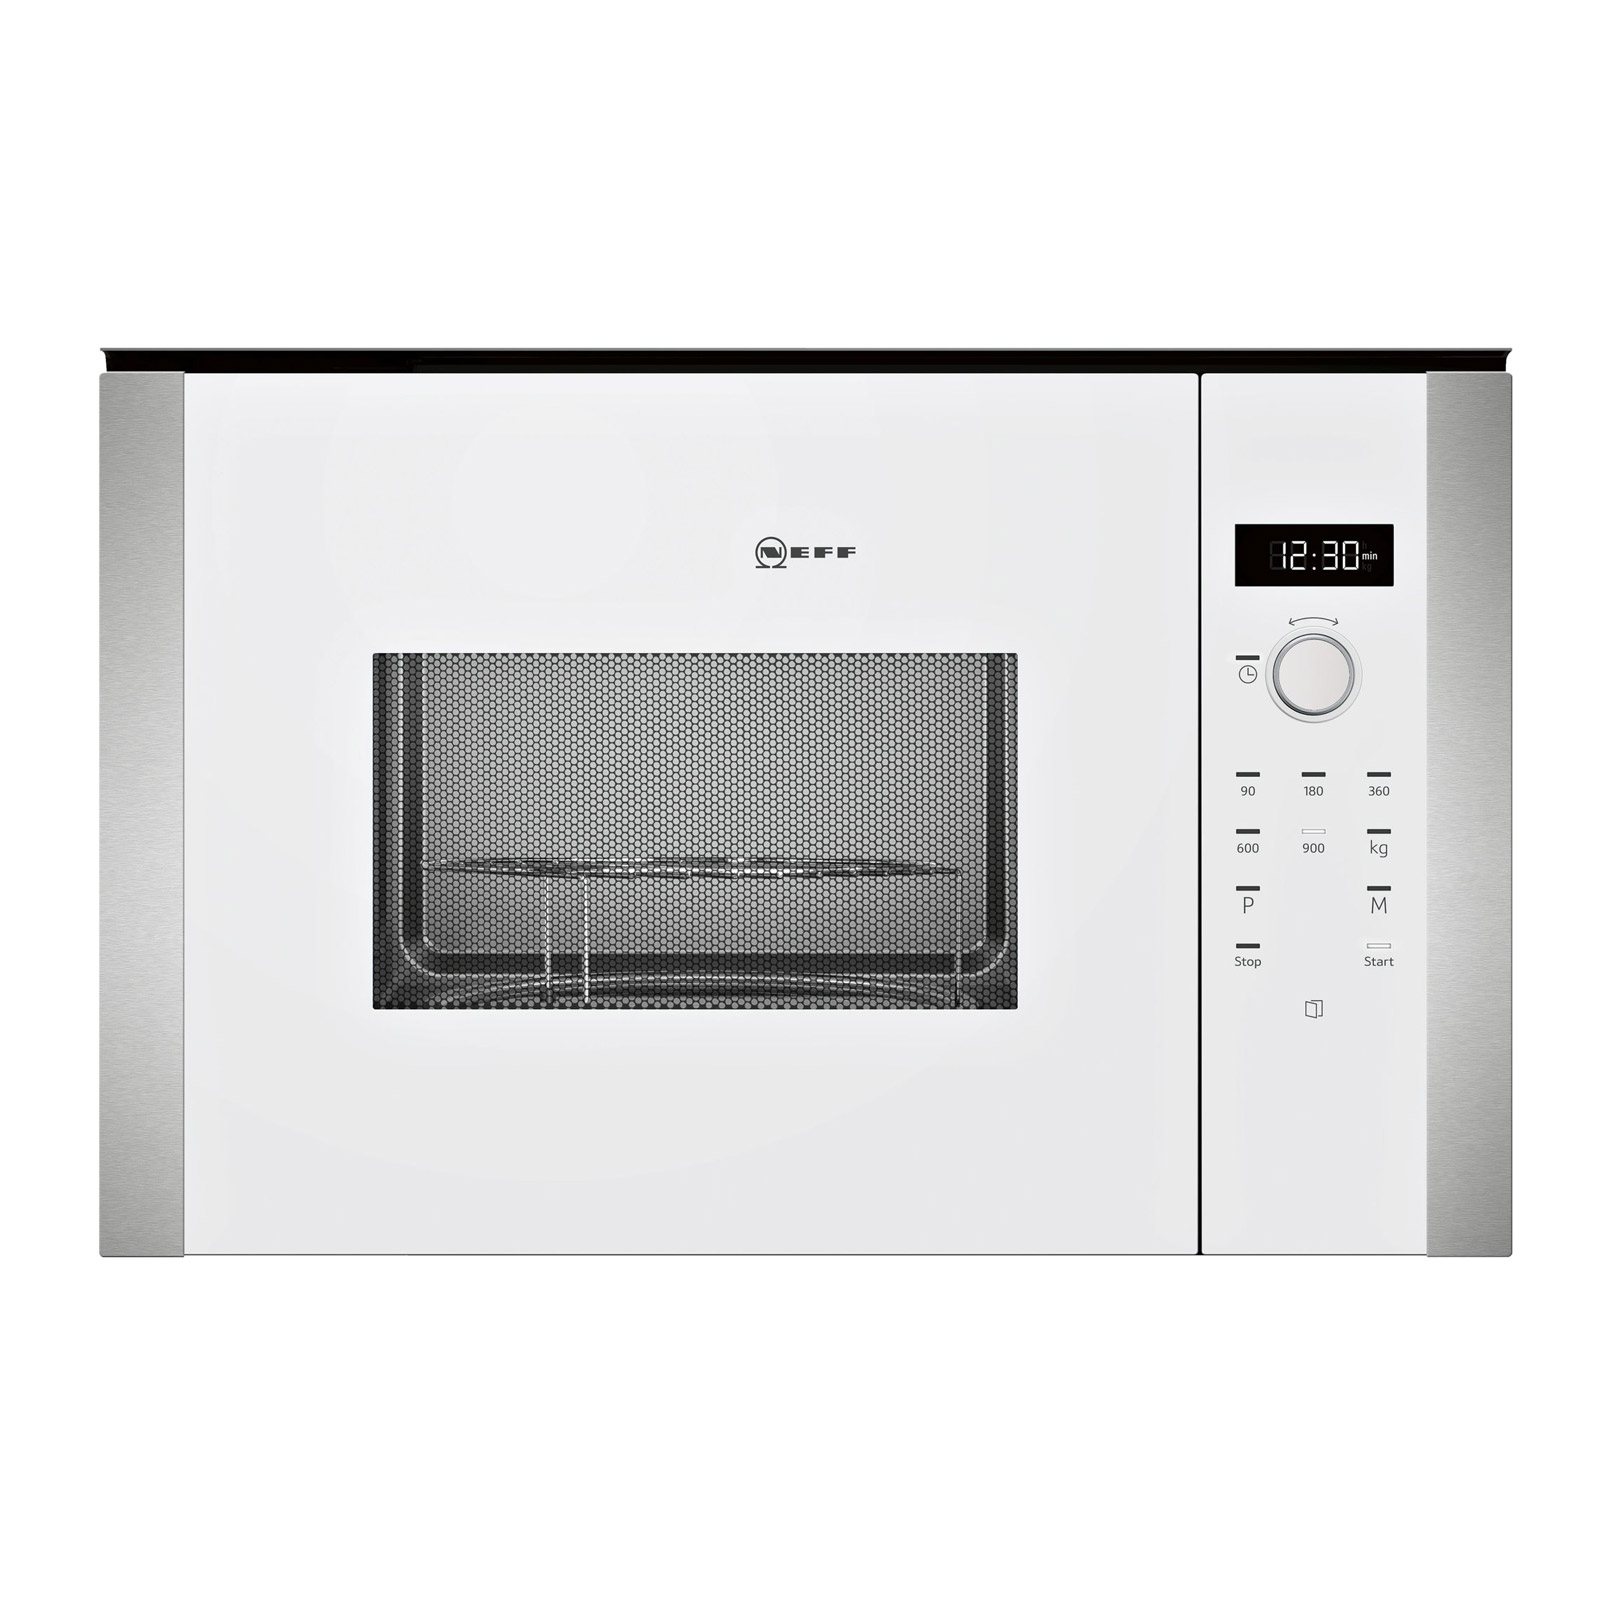 Image of Neff HLAWD53W0B N50 Built In Microwave Oven in White 900W 25L